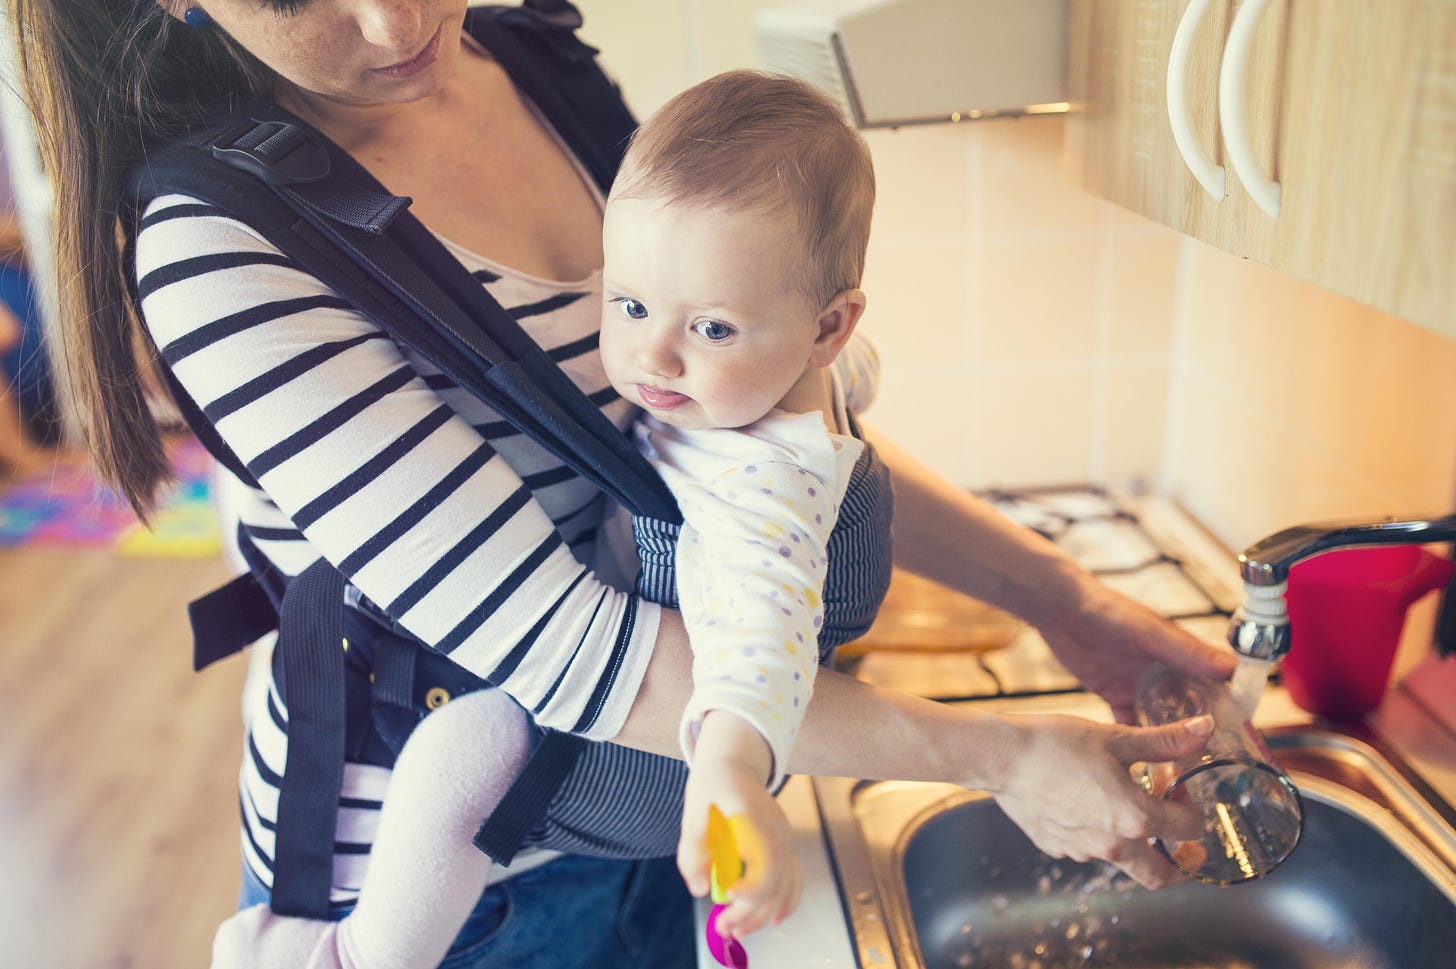 Woman at a sink with a baby strapped to her